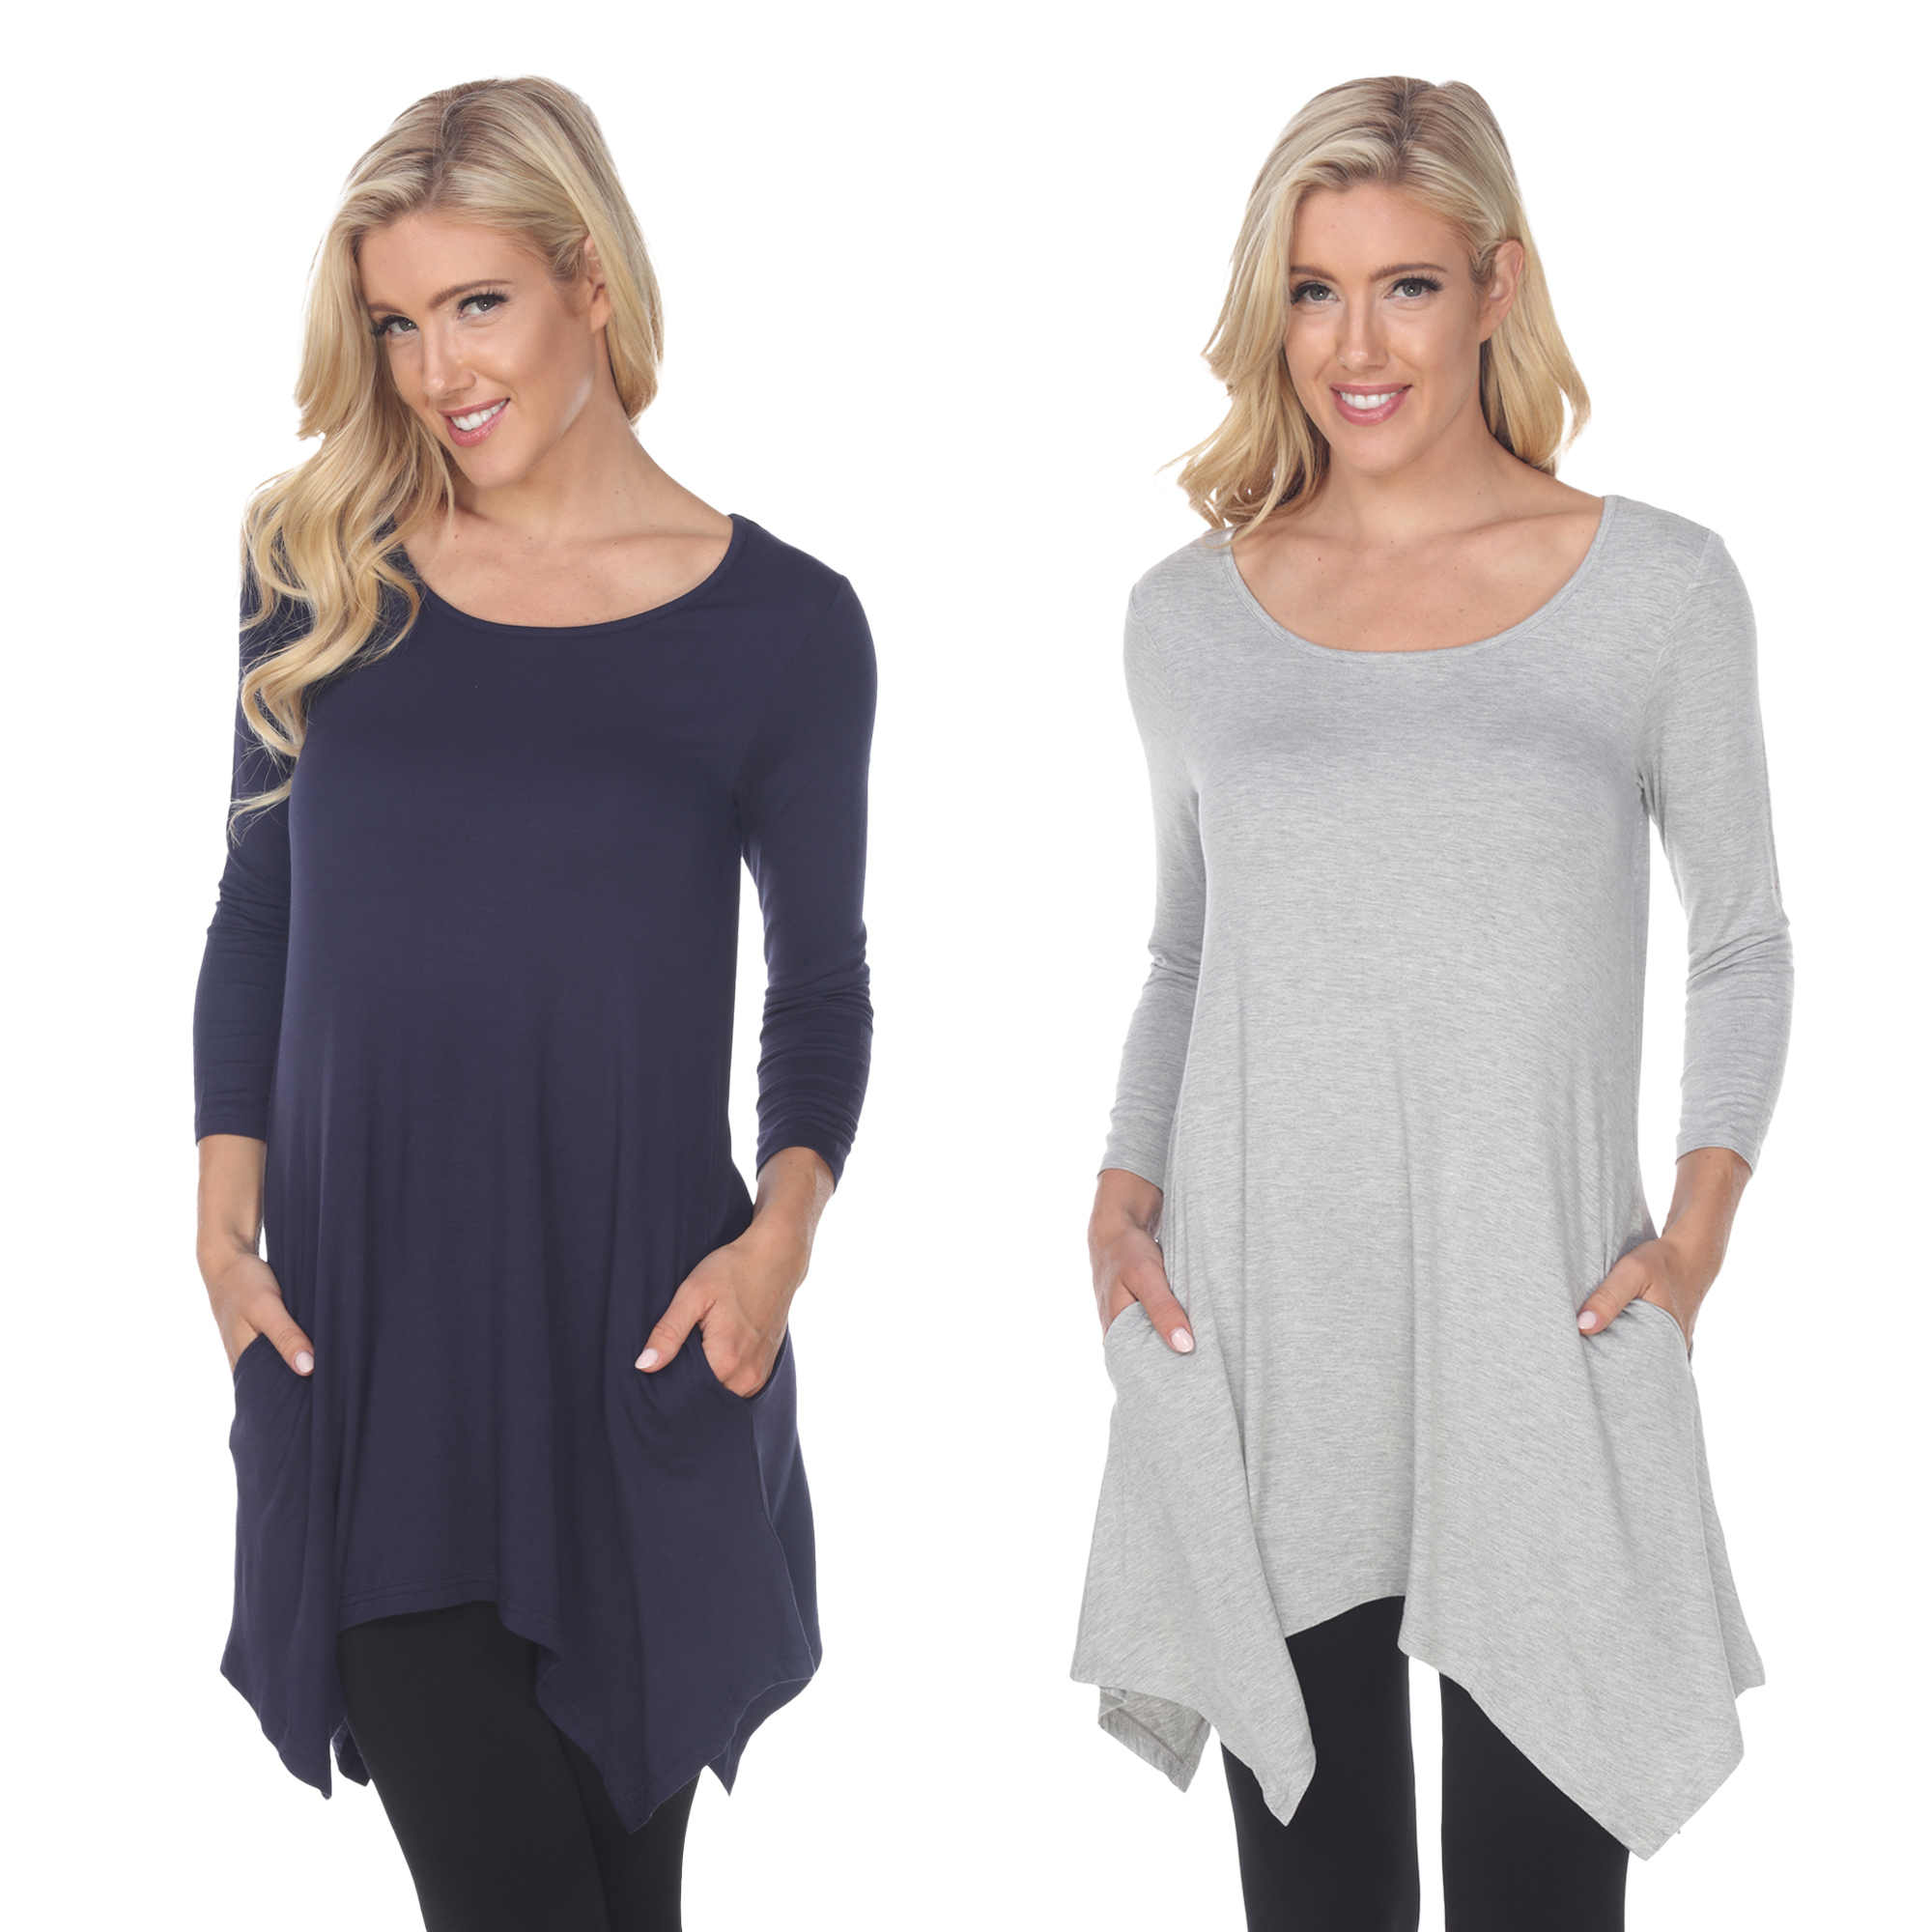 White Mark Women's Pack Of 2 Navy Tunic Top - Navy, Heather Grey, Large